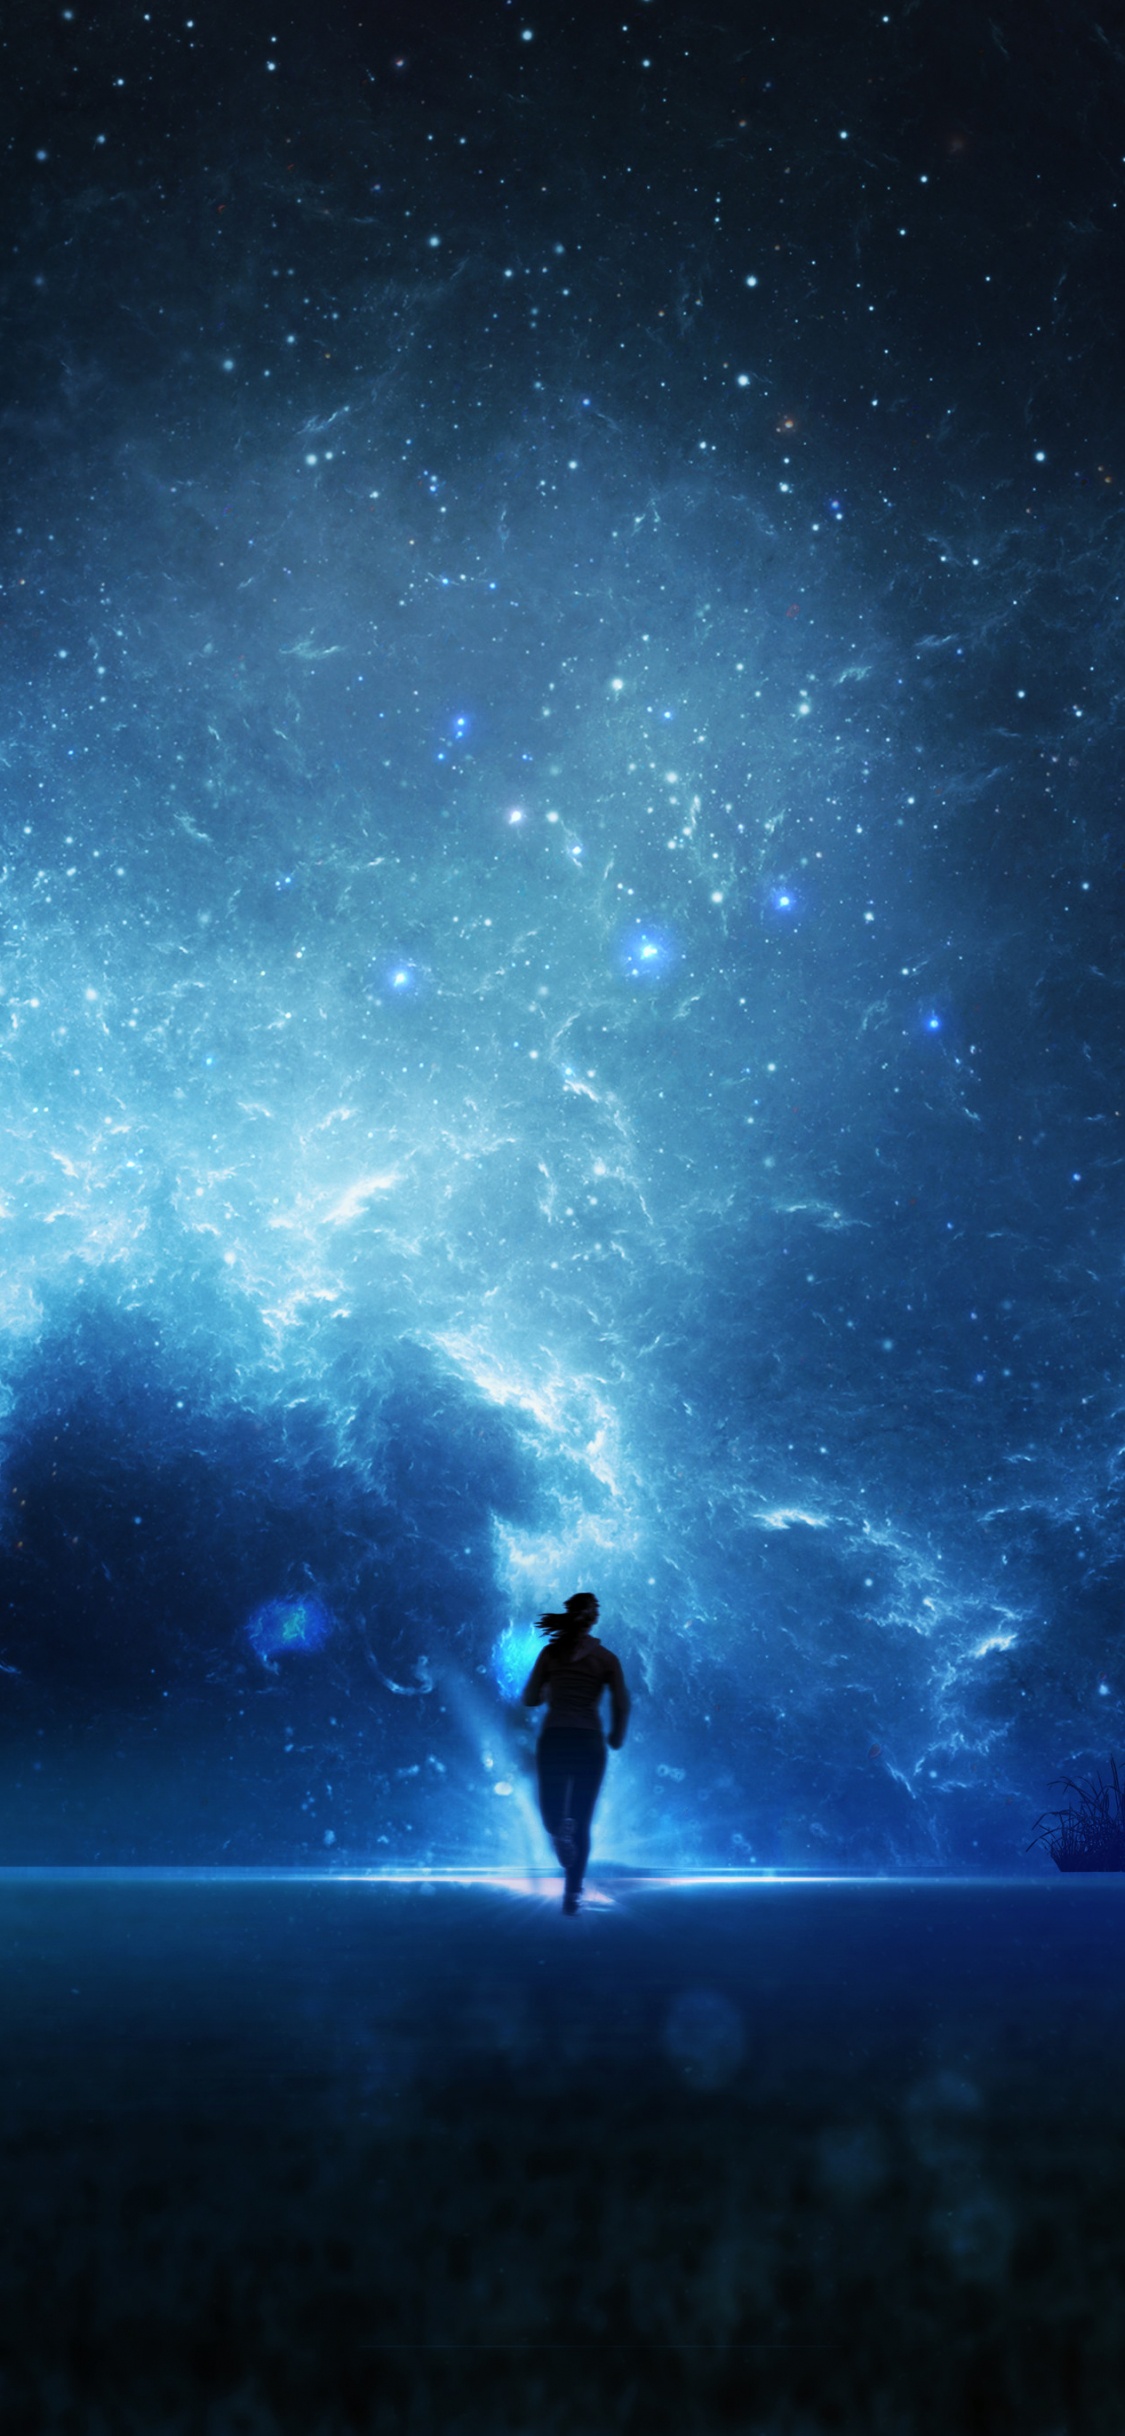 Man in Black Jacket and Pants Standing on Black Rock Under Starry Night. Wallpaper in 1125x2436 Resolution